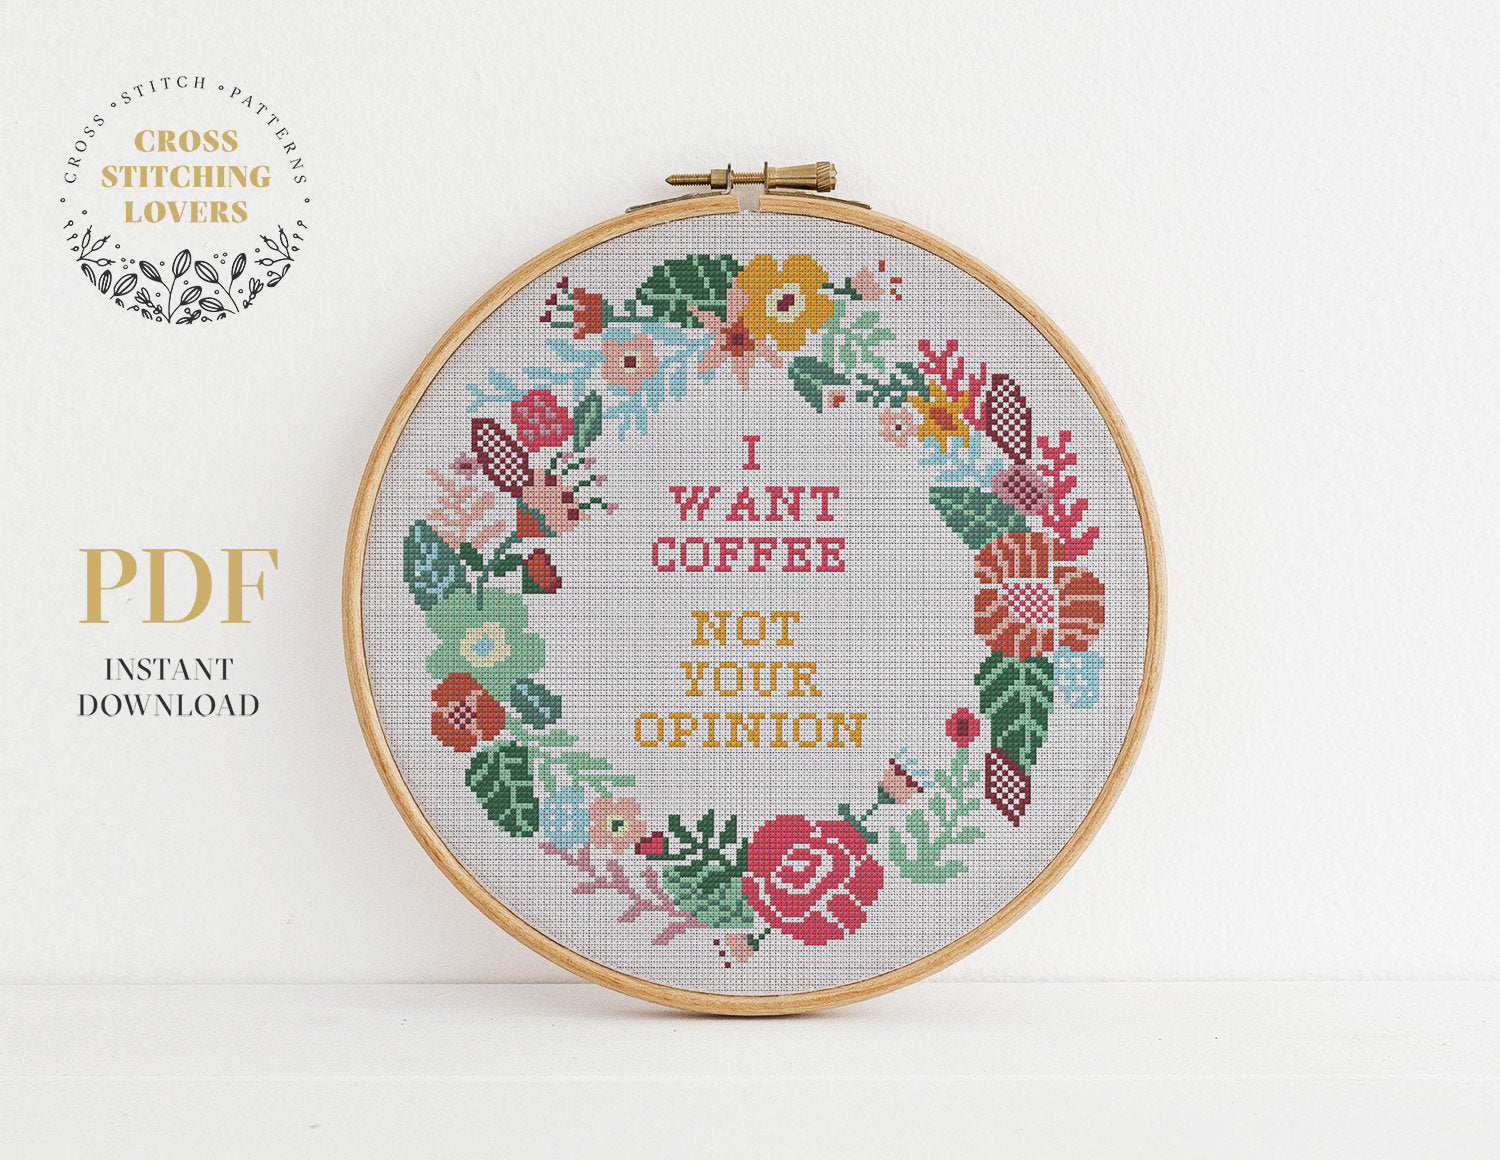 I want coffee NOT your opinion - Cross stitch pattern